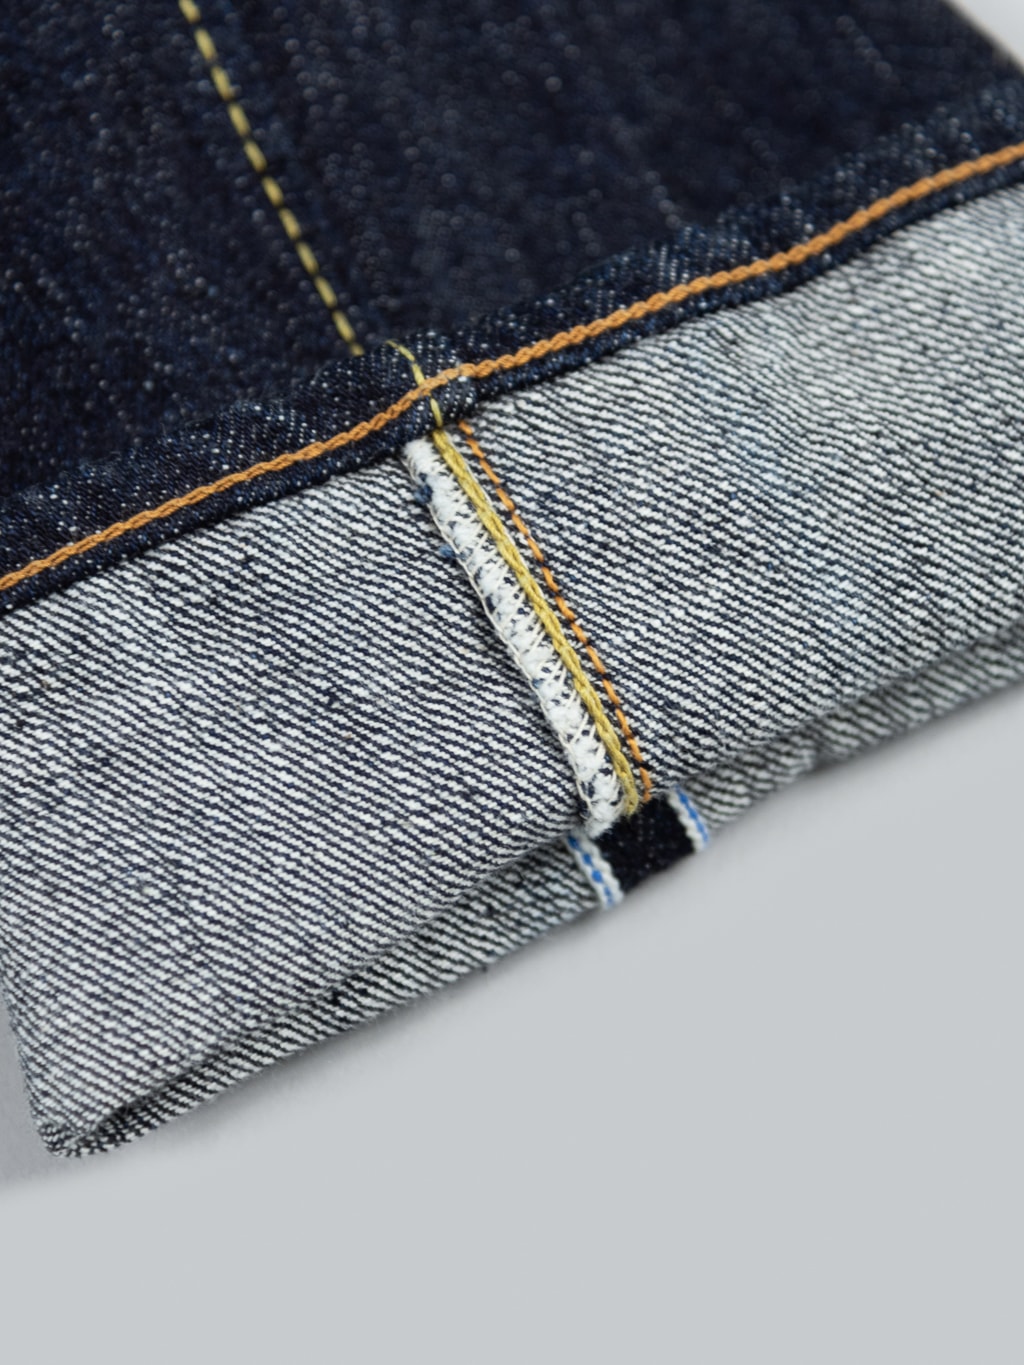 Pure Blue Japan Relaxed Tapered denim jeans selvedge seam